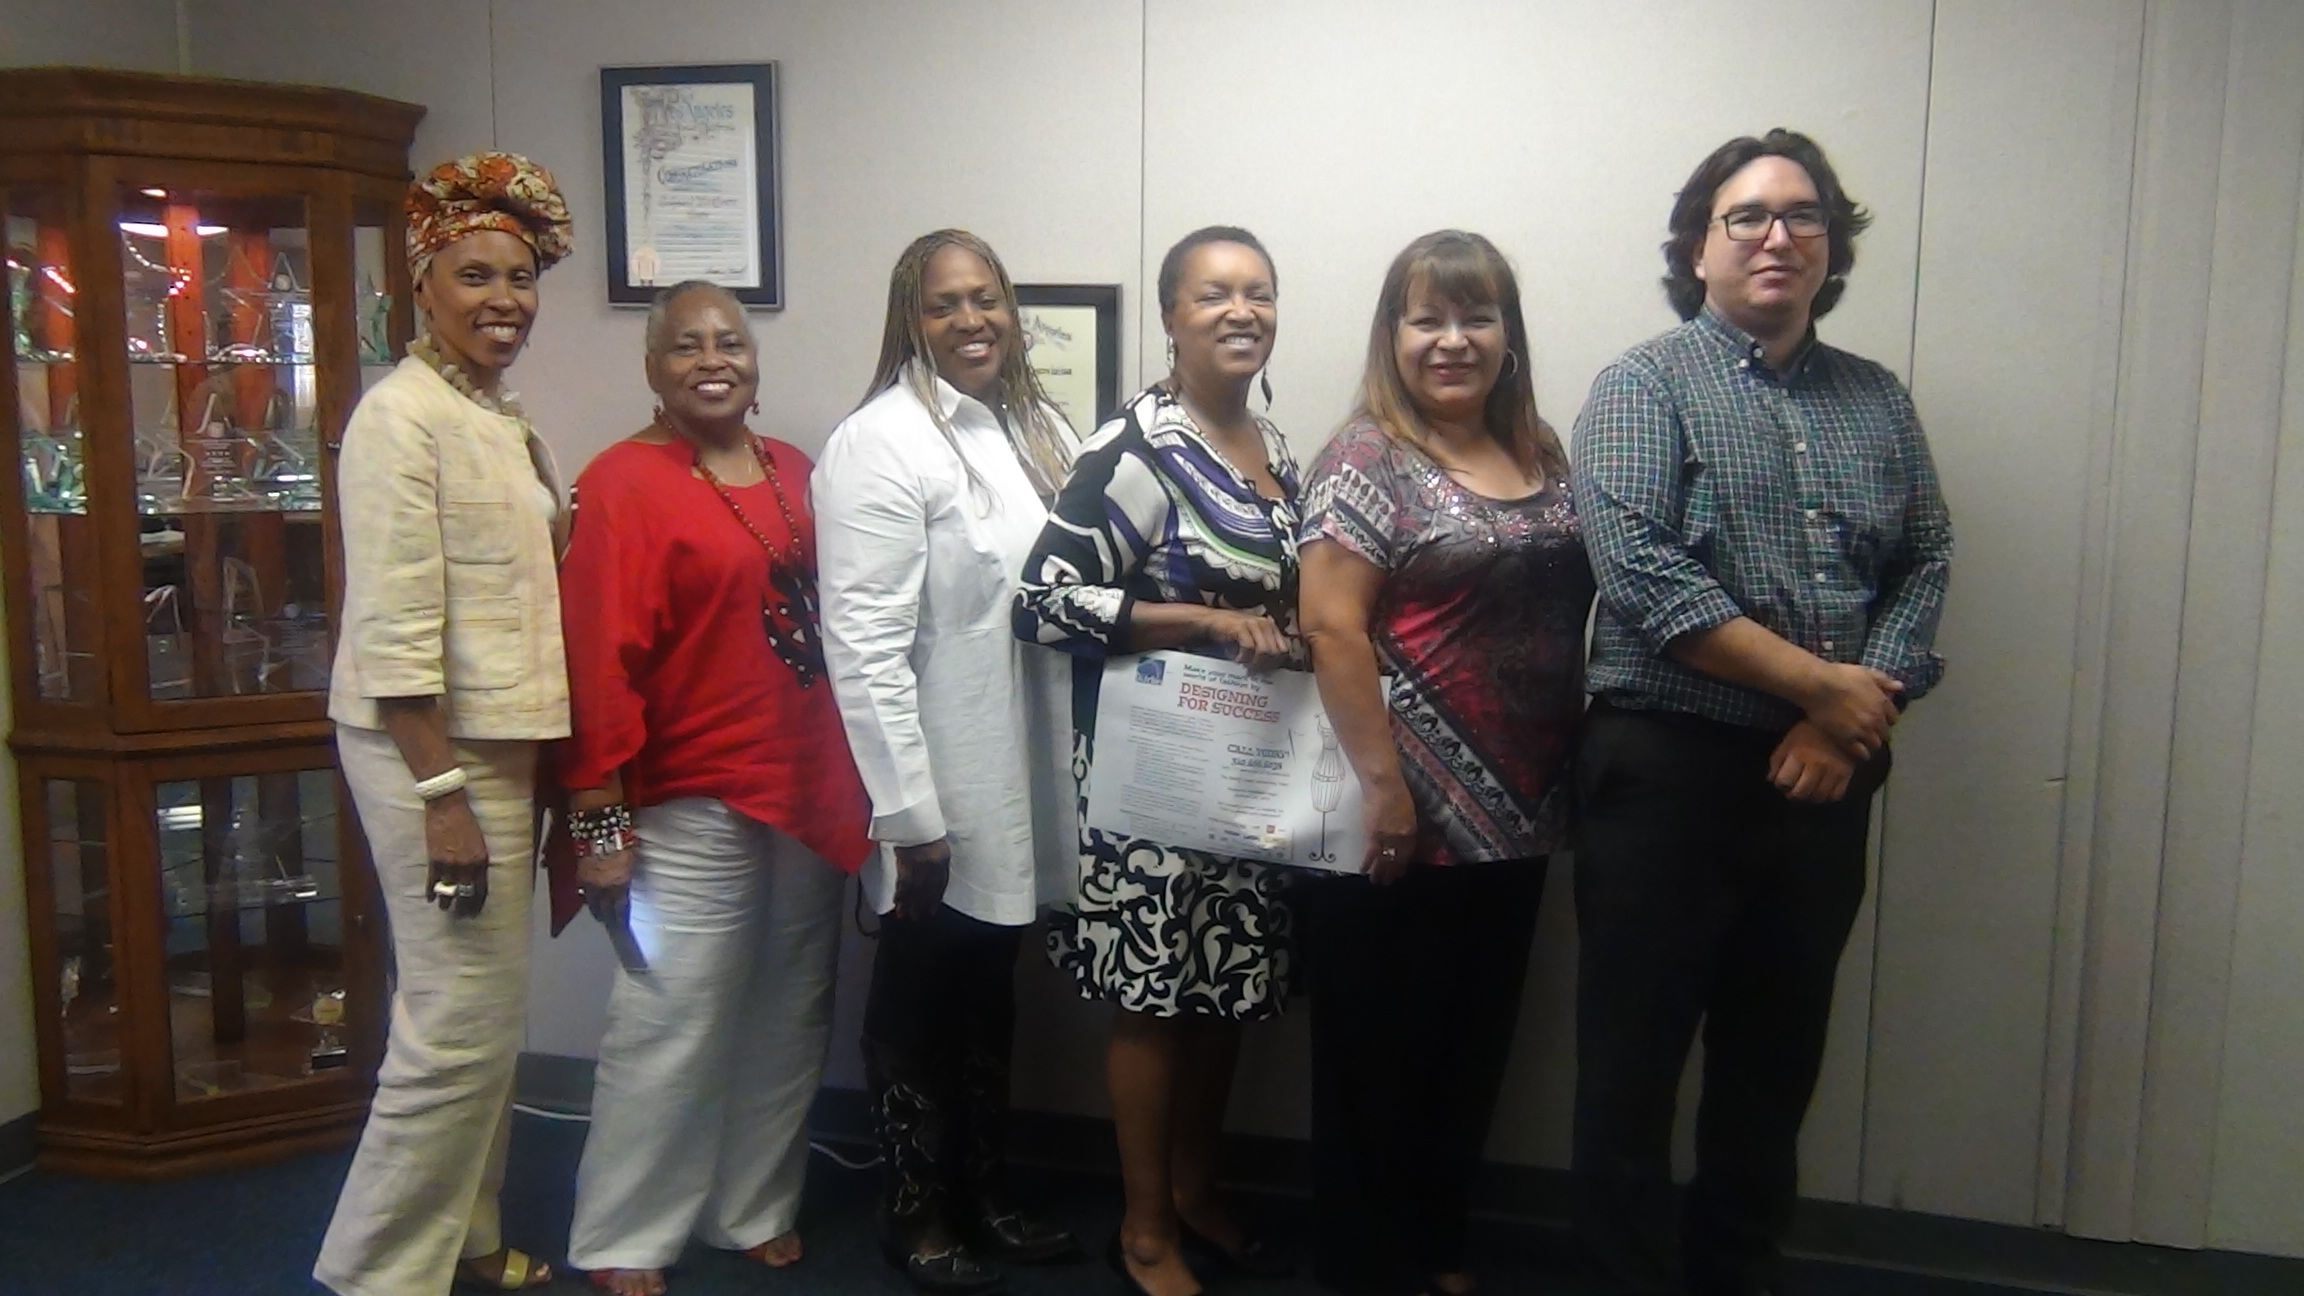 Clotee McAfee, founder of STITCHES TECHNOLOGY, Los Angeles, CA. (center) poses with the WorkForce Center instructors.